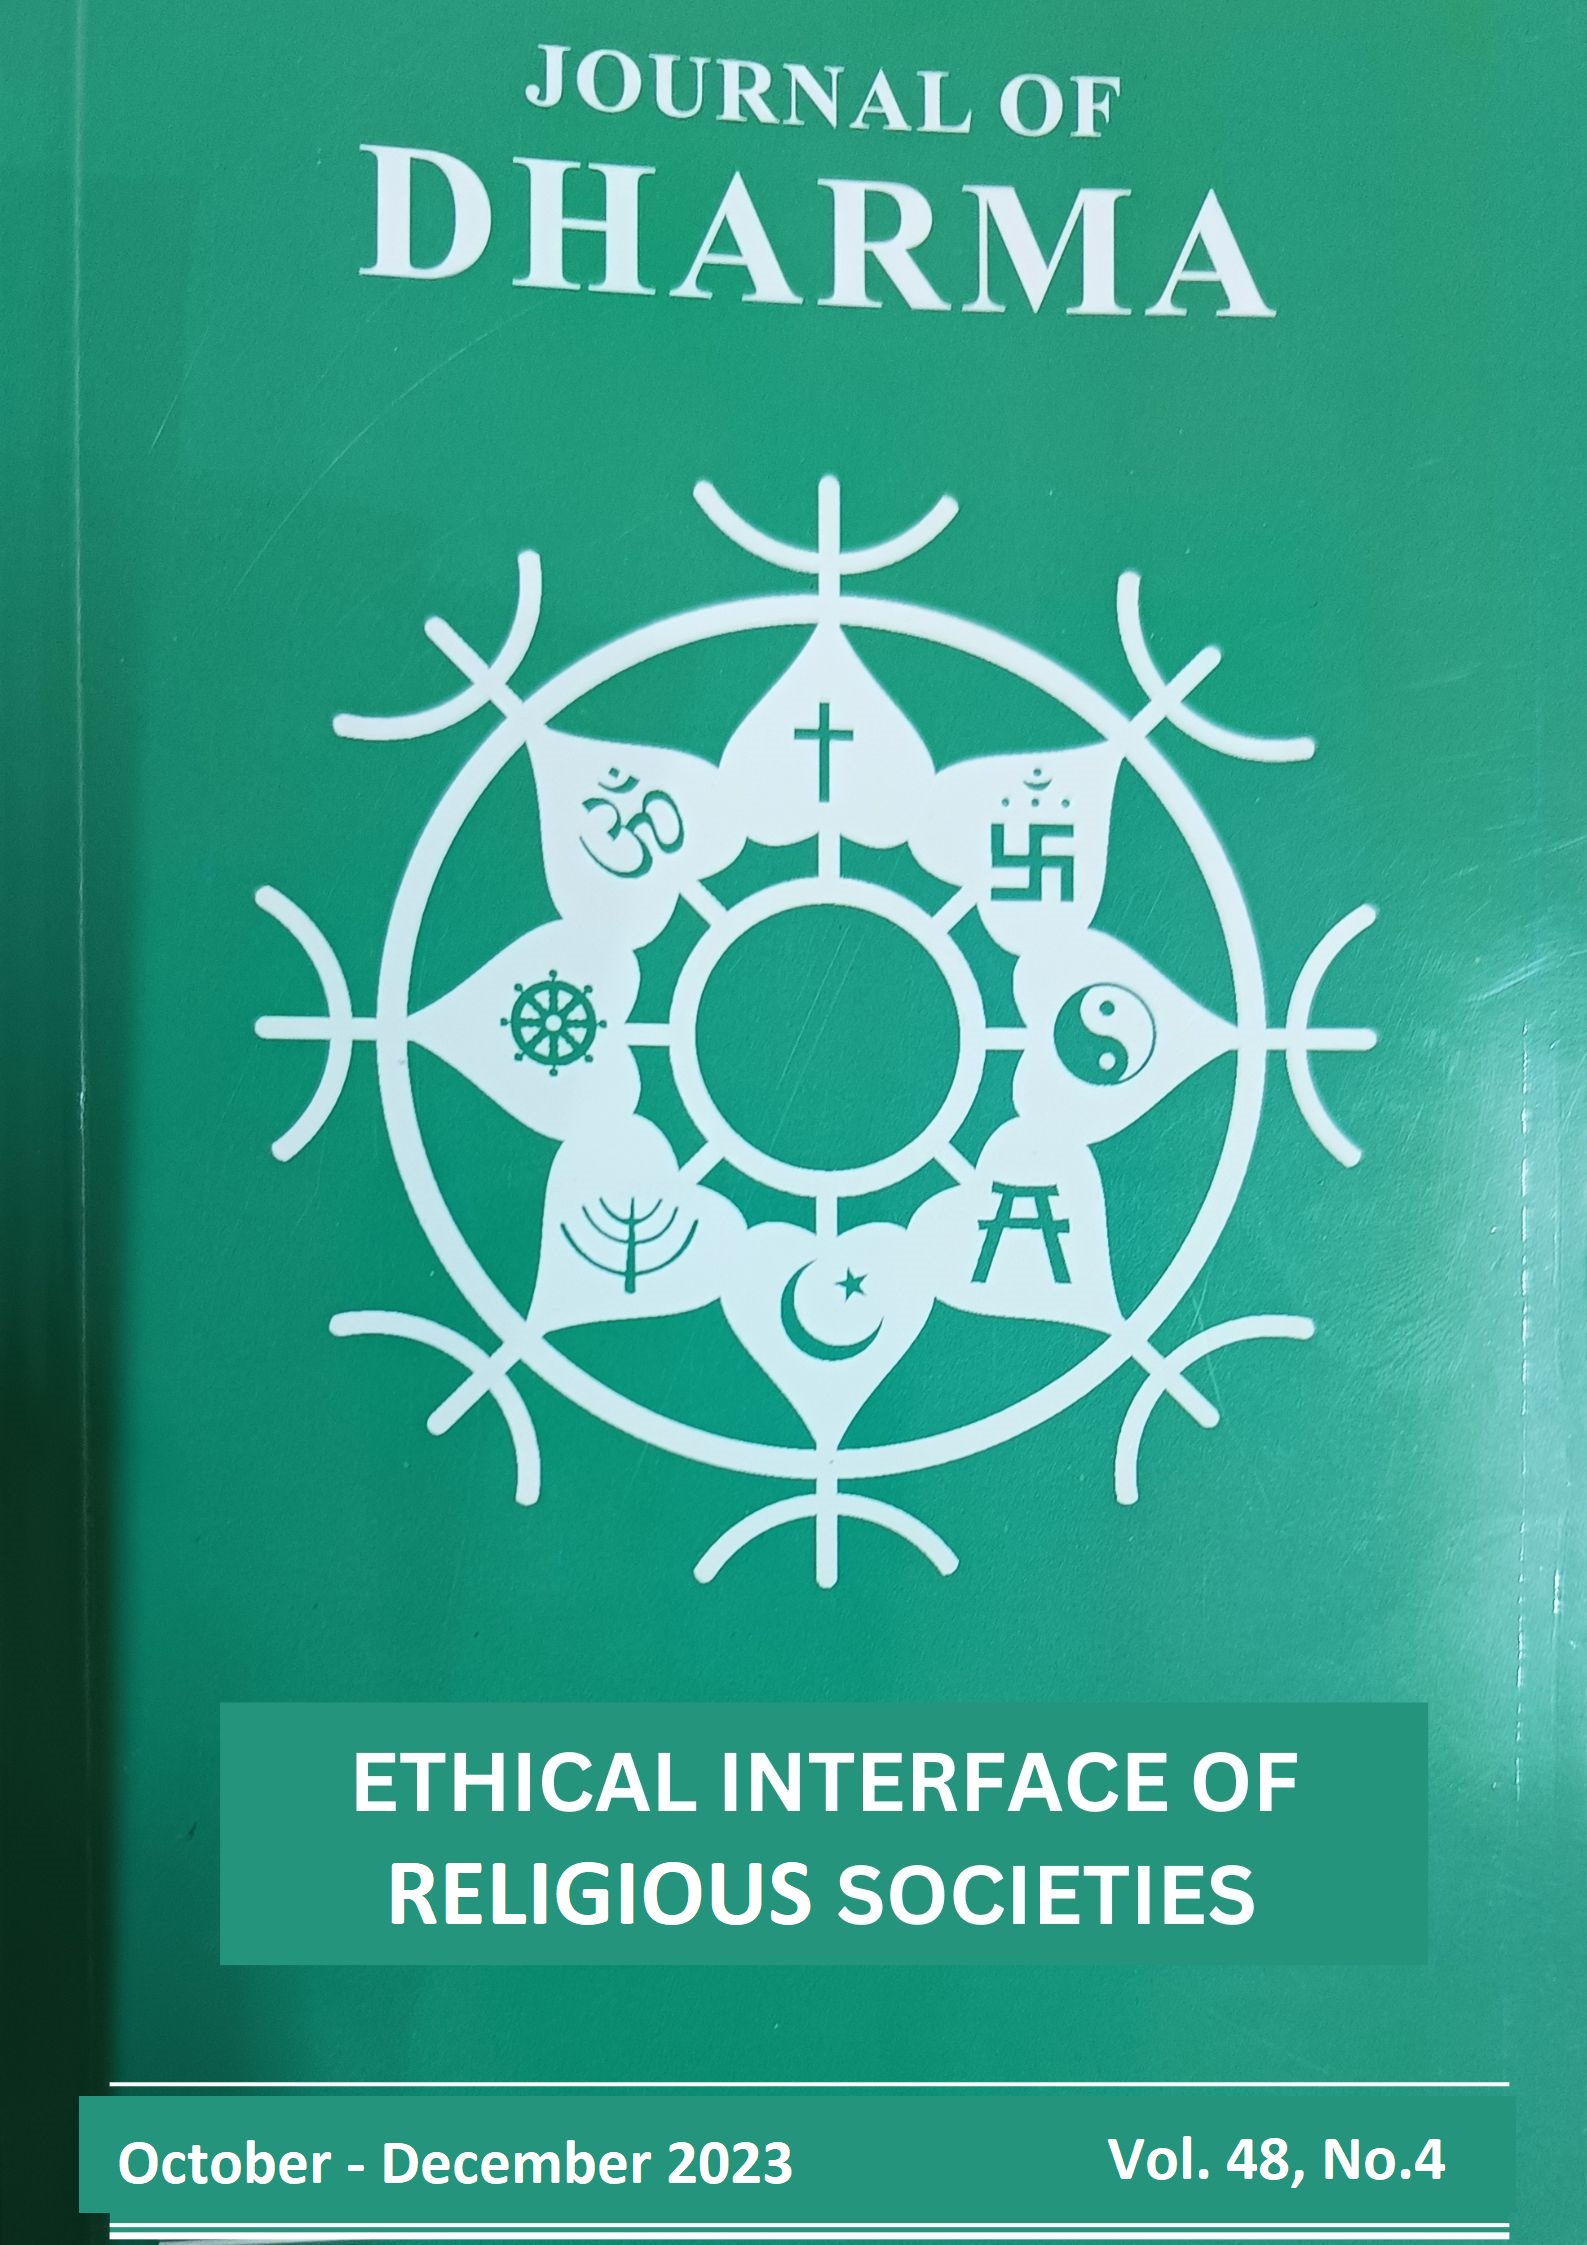 					View Vol. 48 No. 04 (2023): ETHICAL INTERFACE OF RELIGIOUS SOCIETIES
				